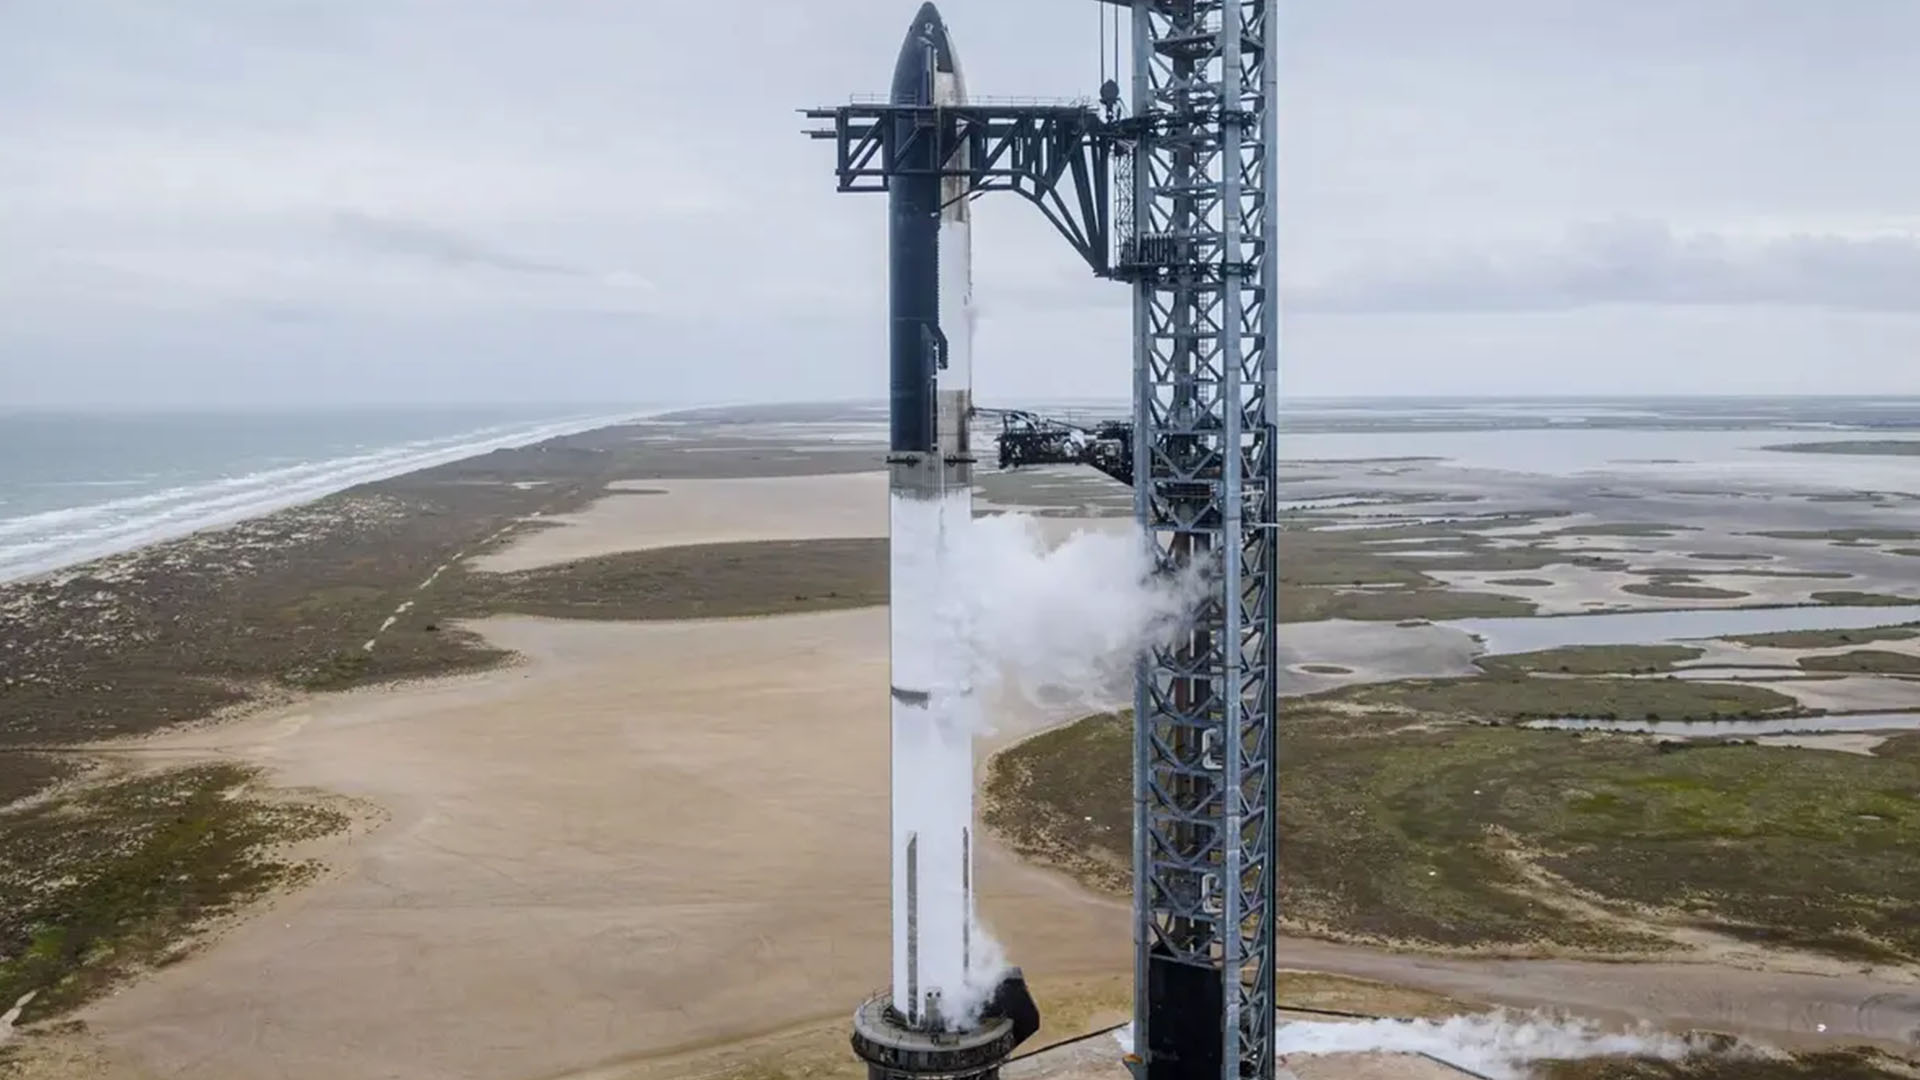 SpaceX's Starship during a landmark fueling test on Jan. 23, 2023